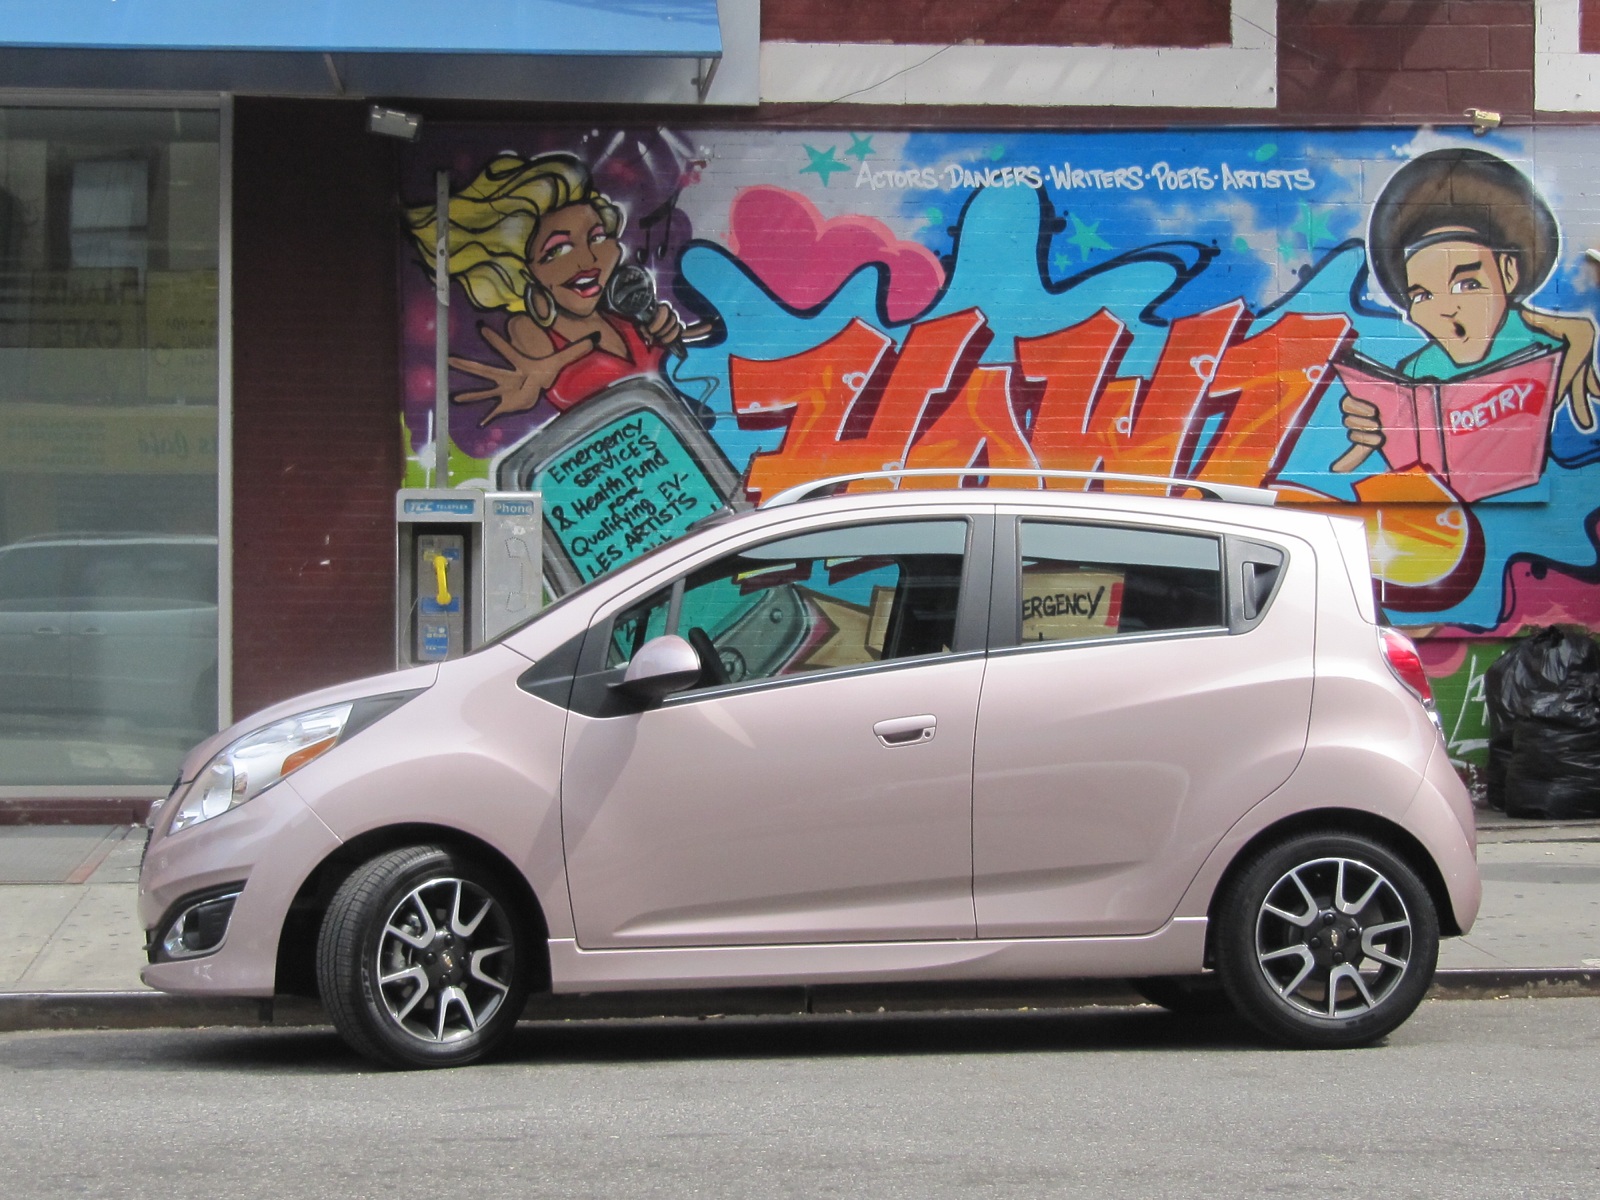 2013 Chevrolet Spark: First Drive